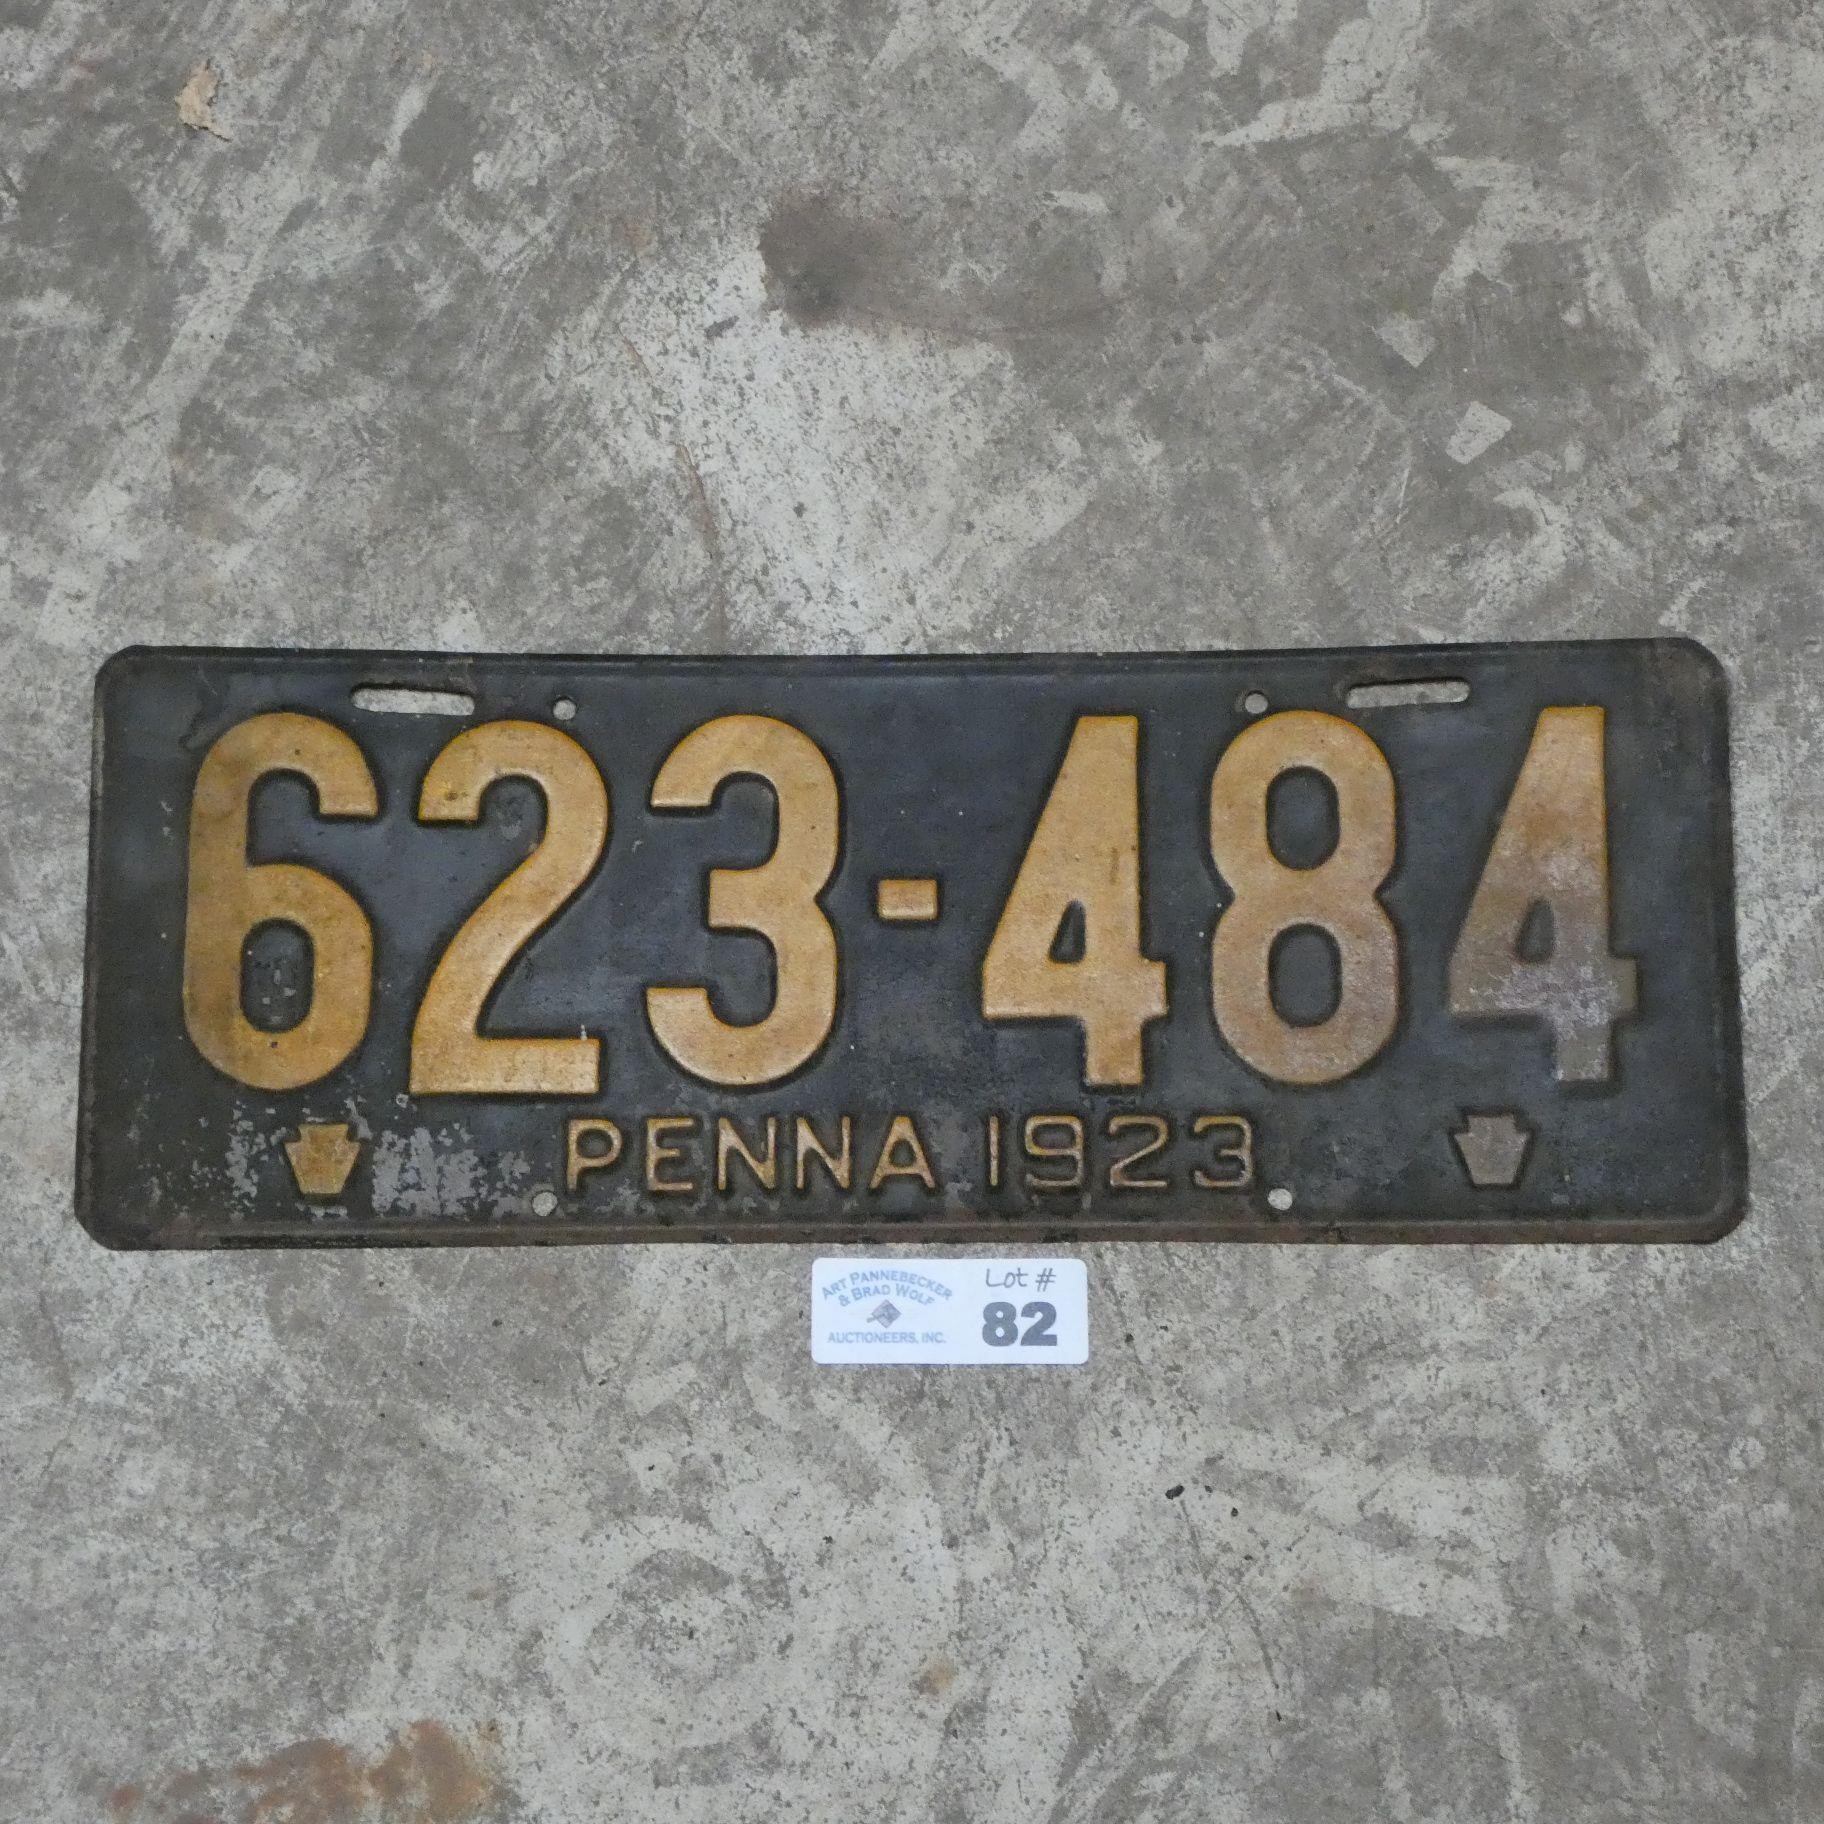 Early 1923 PA License Plate